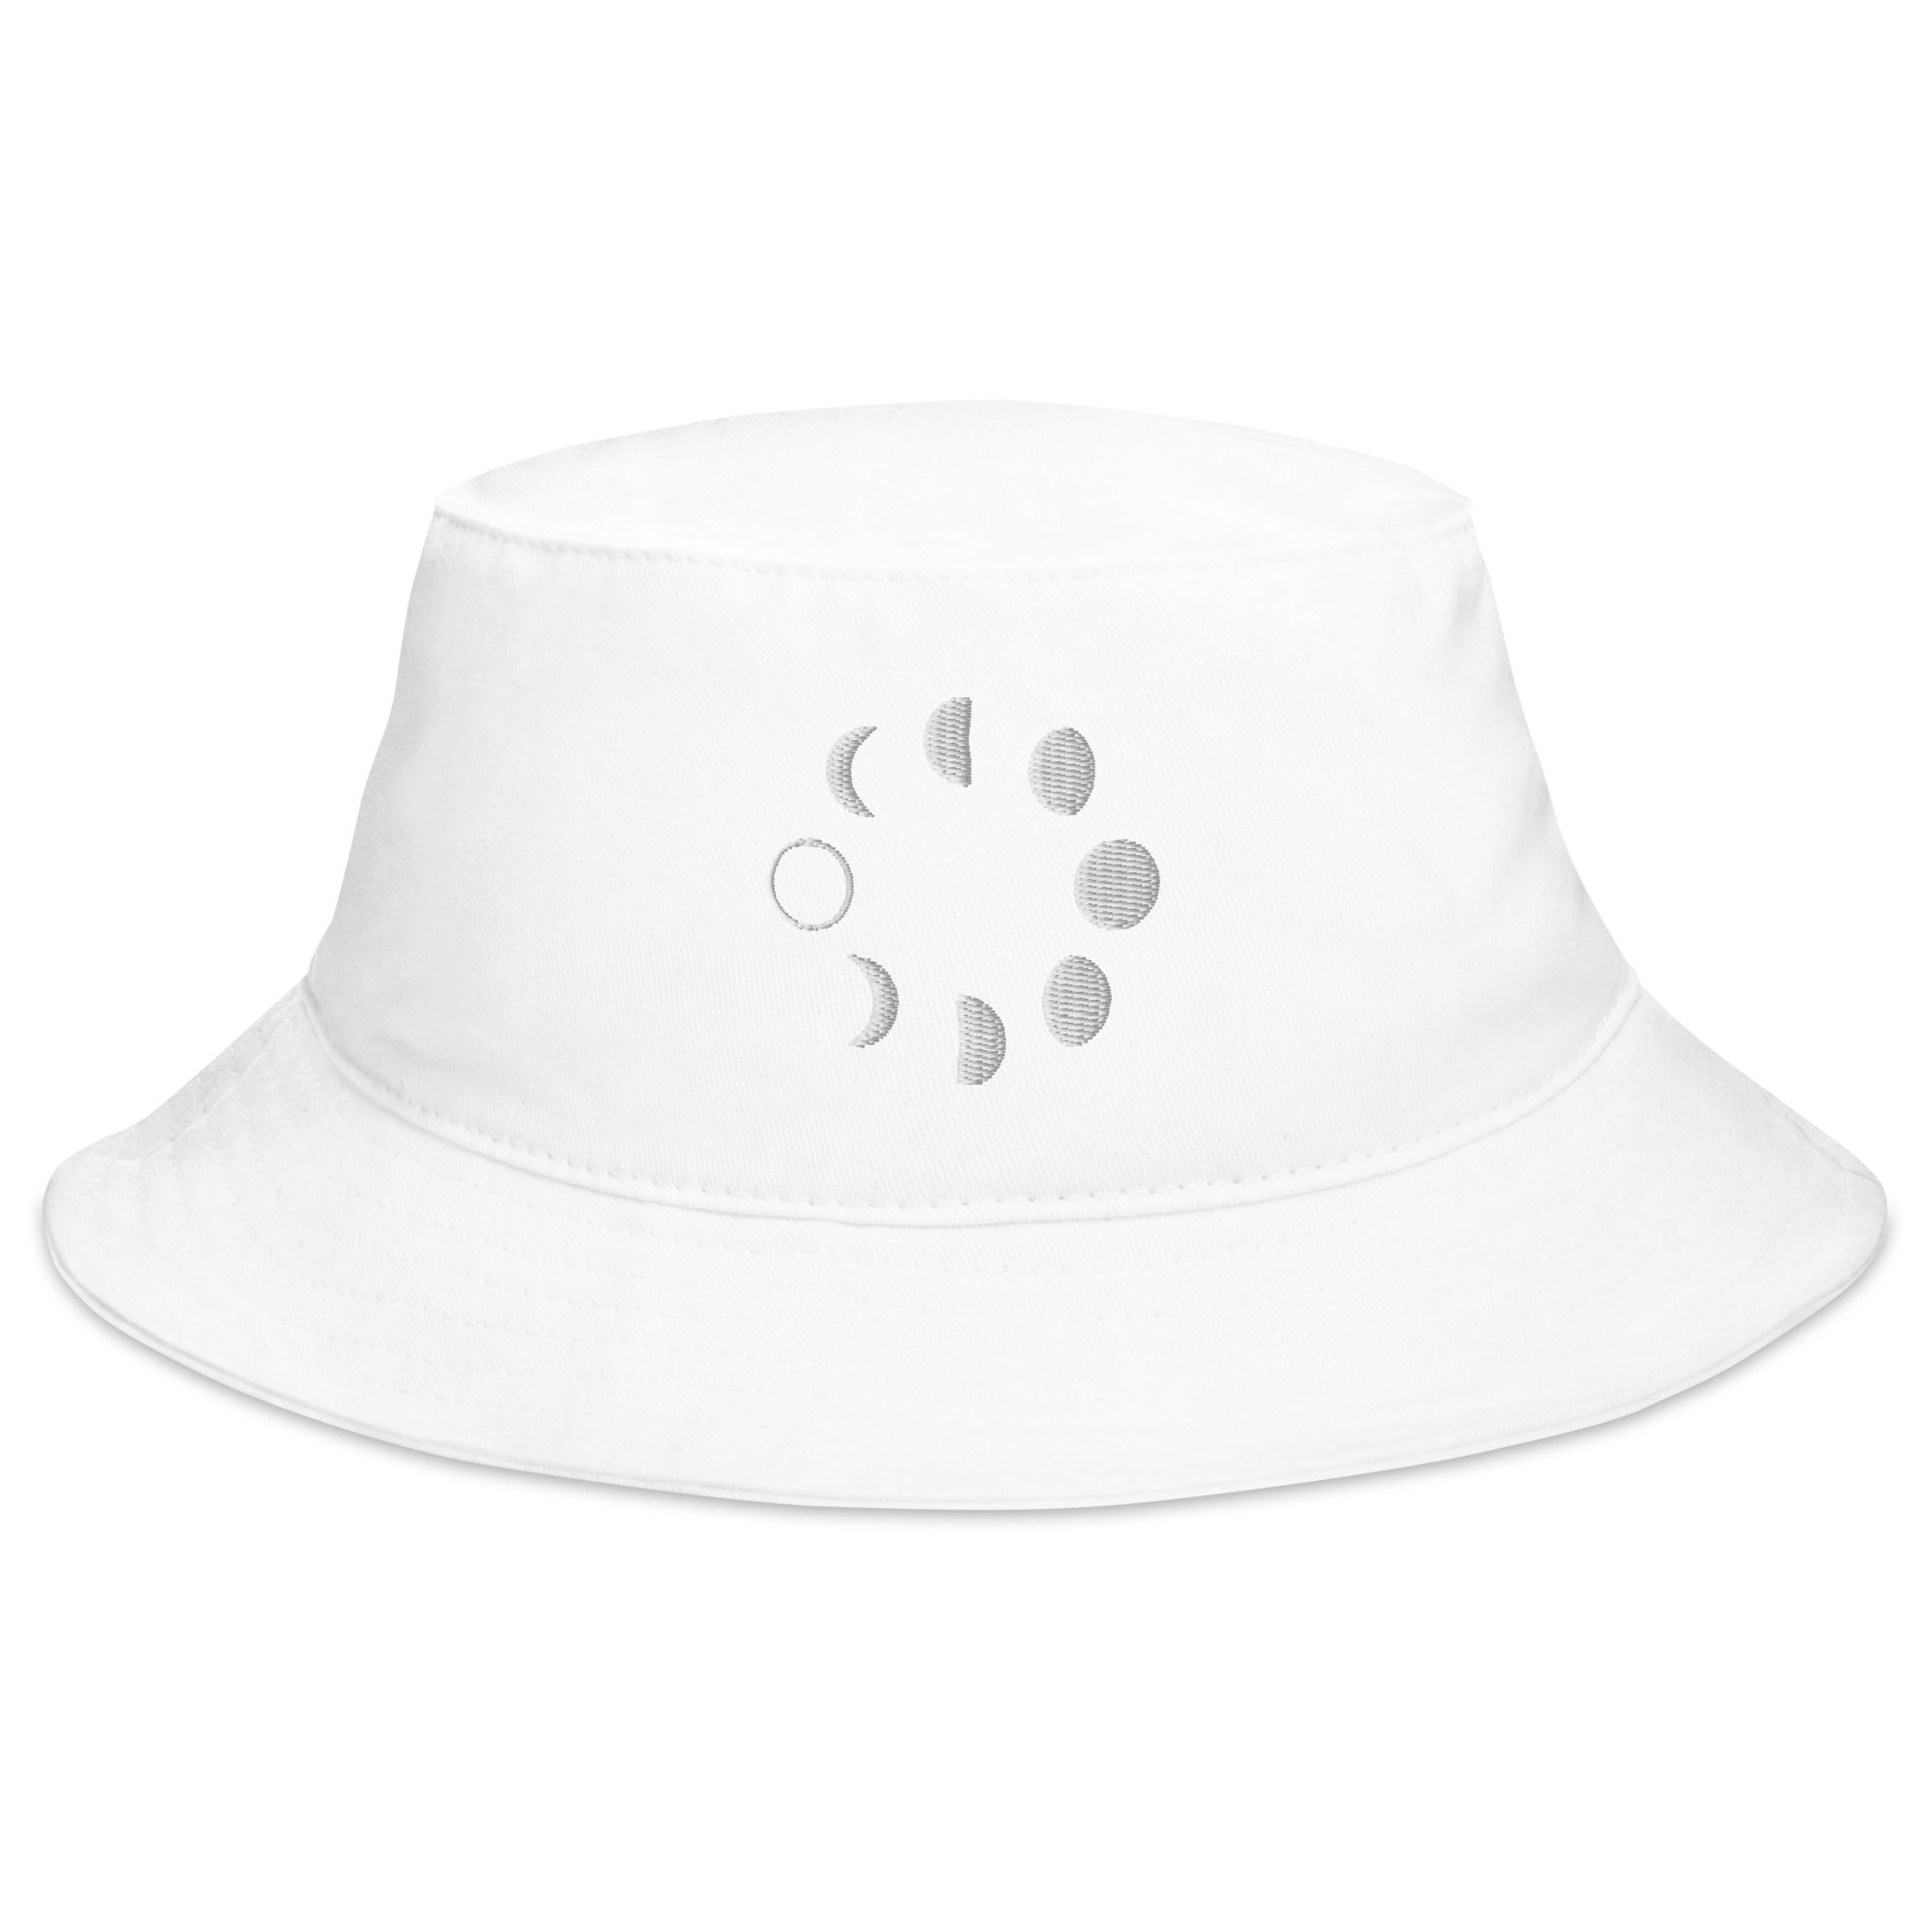 Lunar Moon Phases Embroidered Bucket Hat